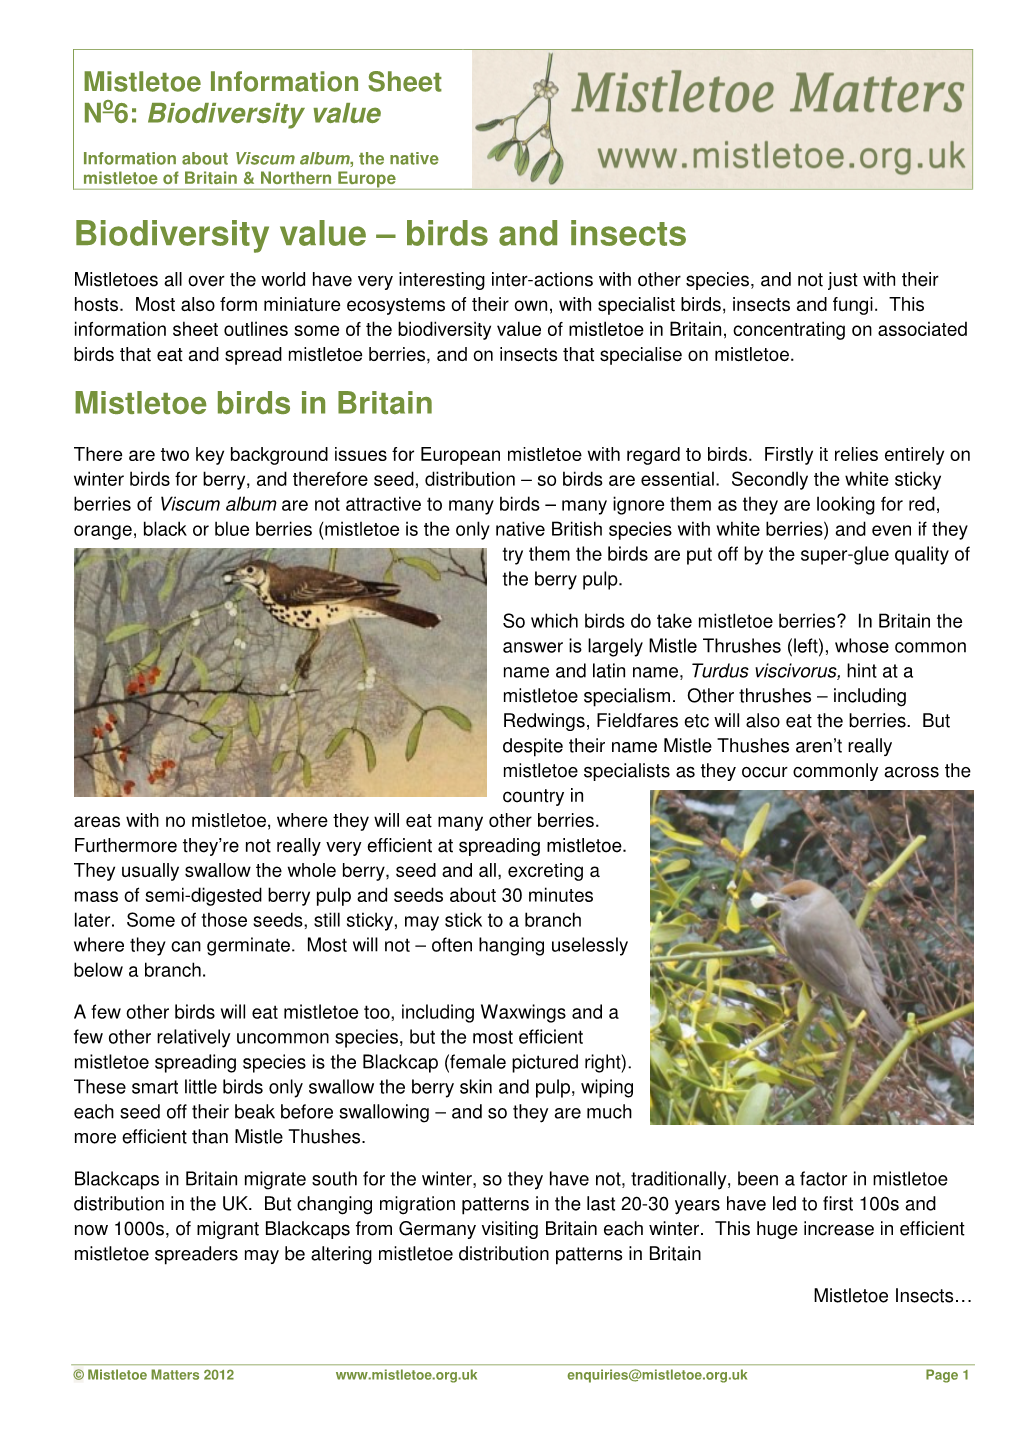 Biodiversity Value – Birds and Insects